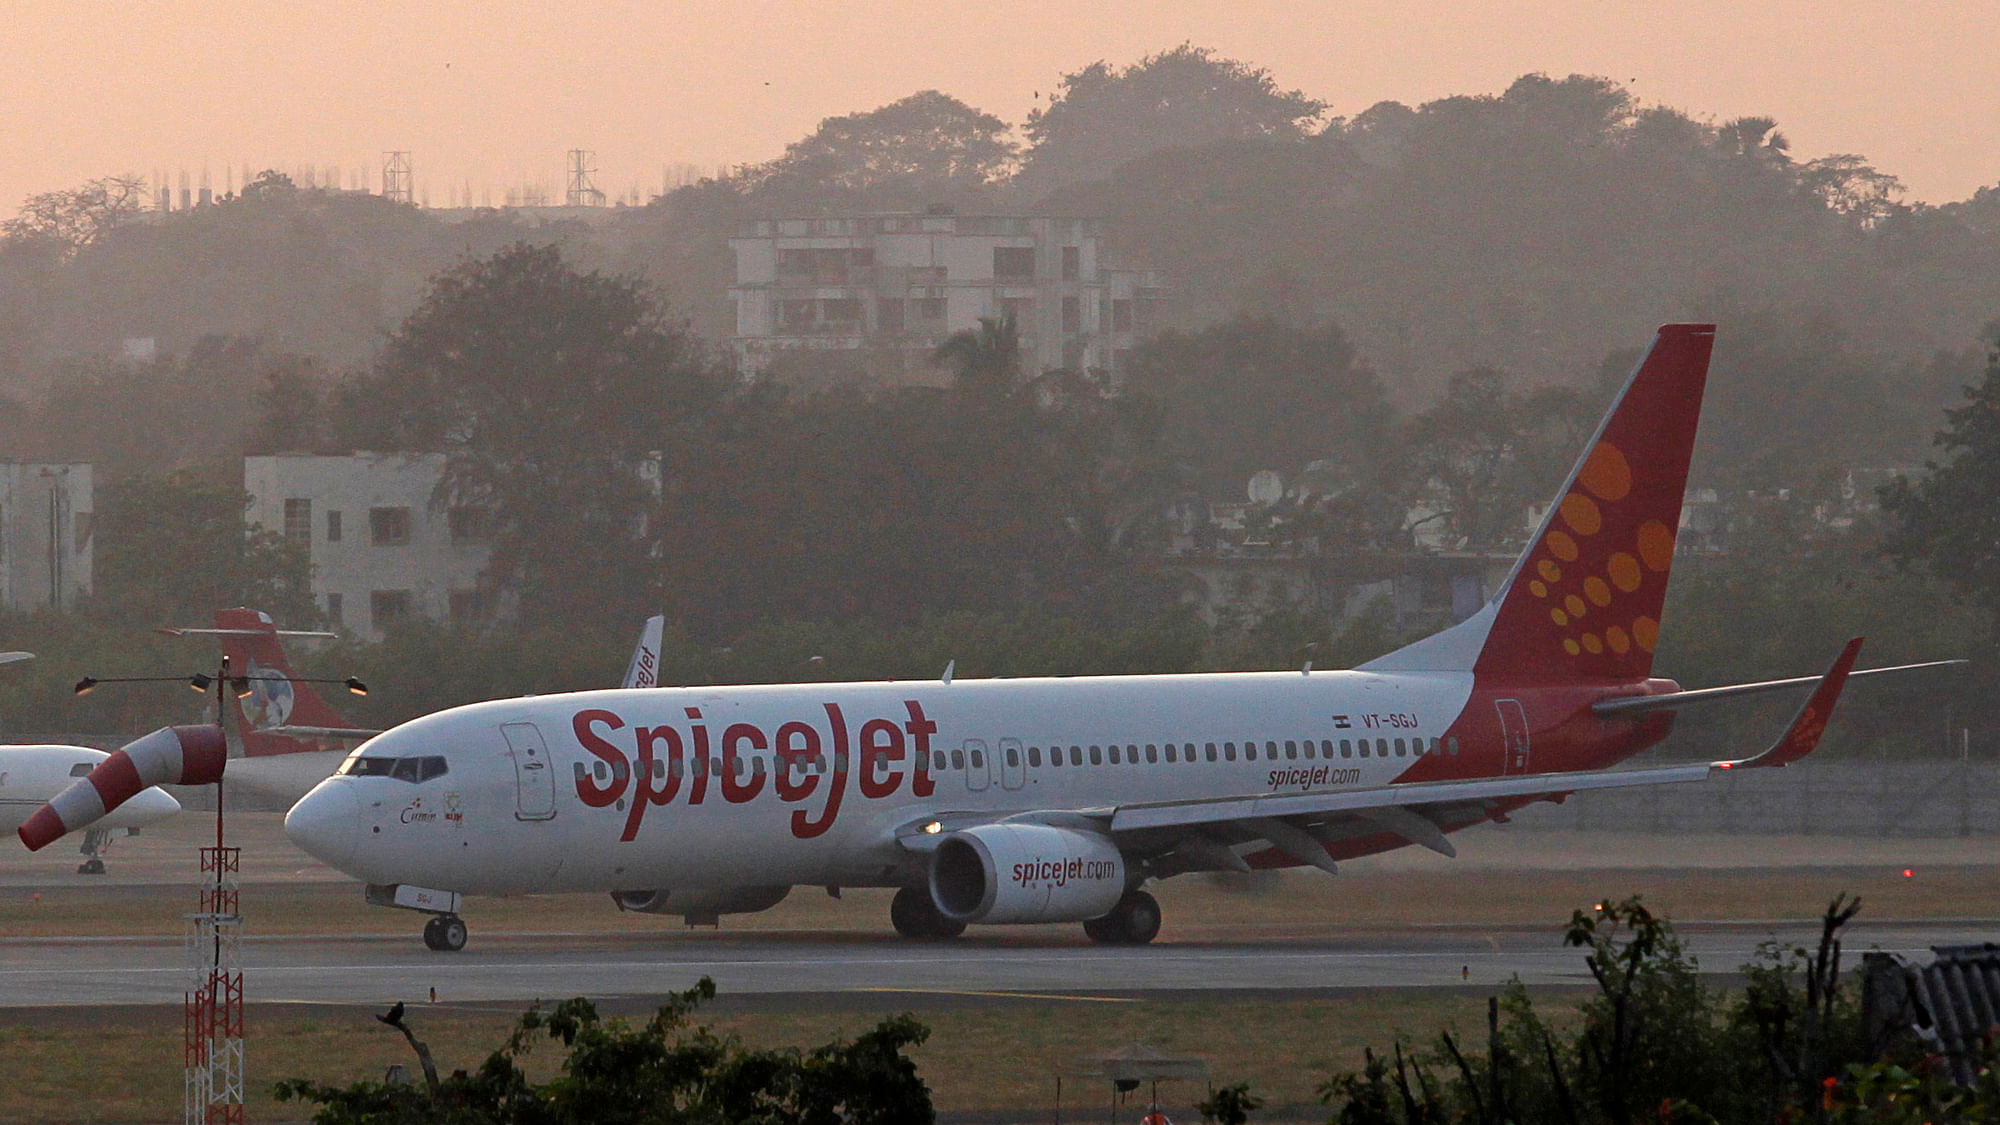 A SpiceJet Boeing 737-800 aircraft.